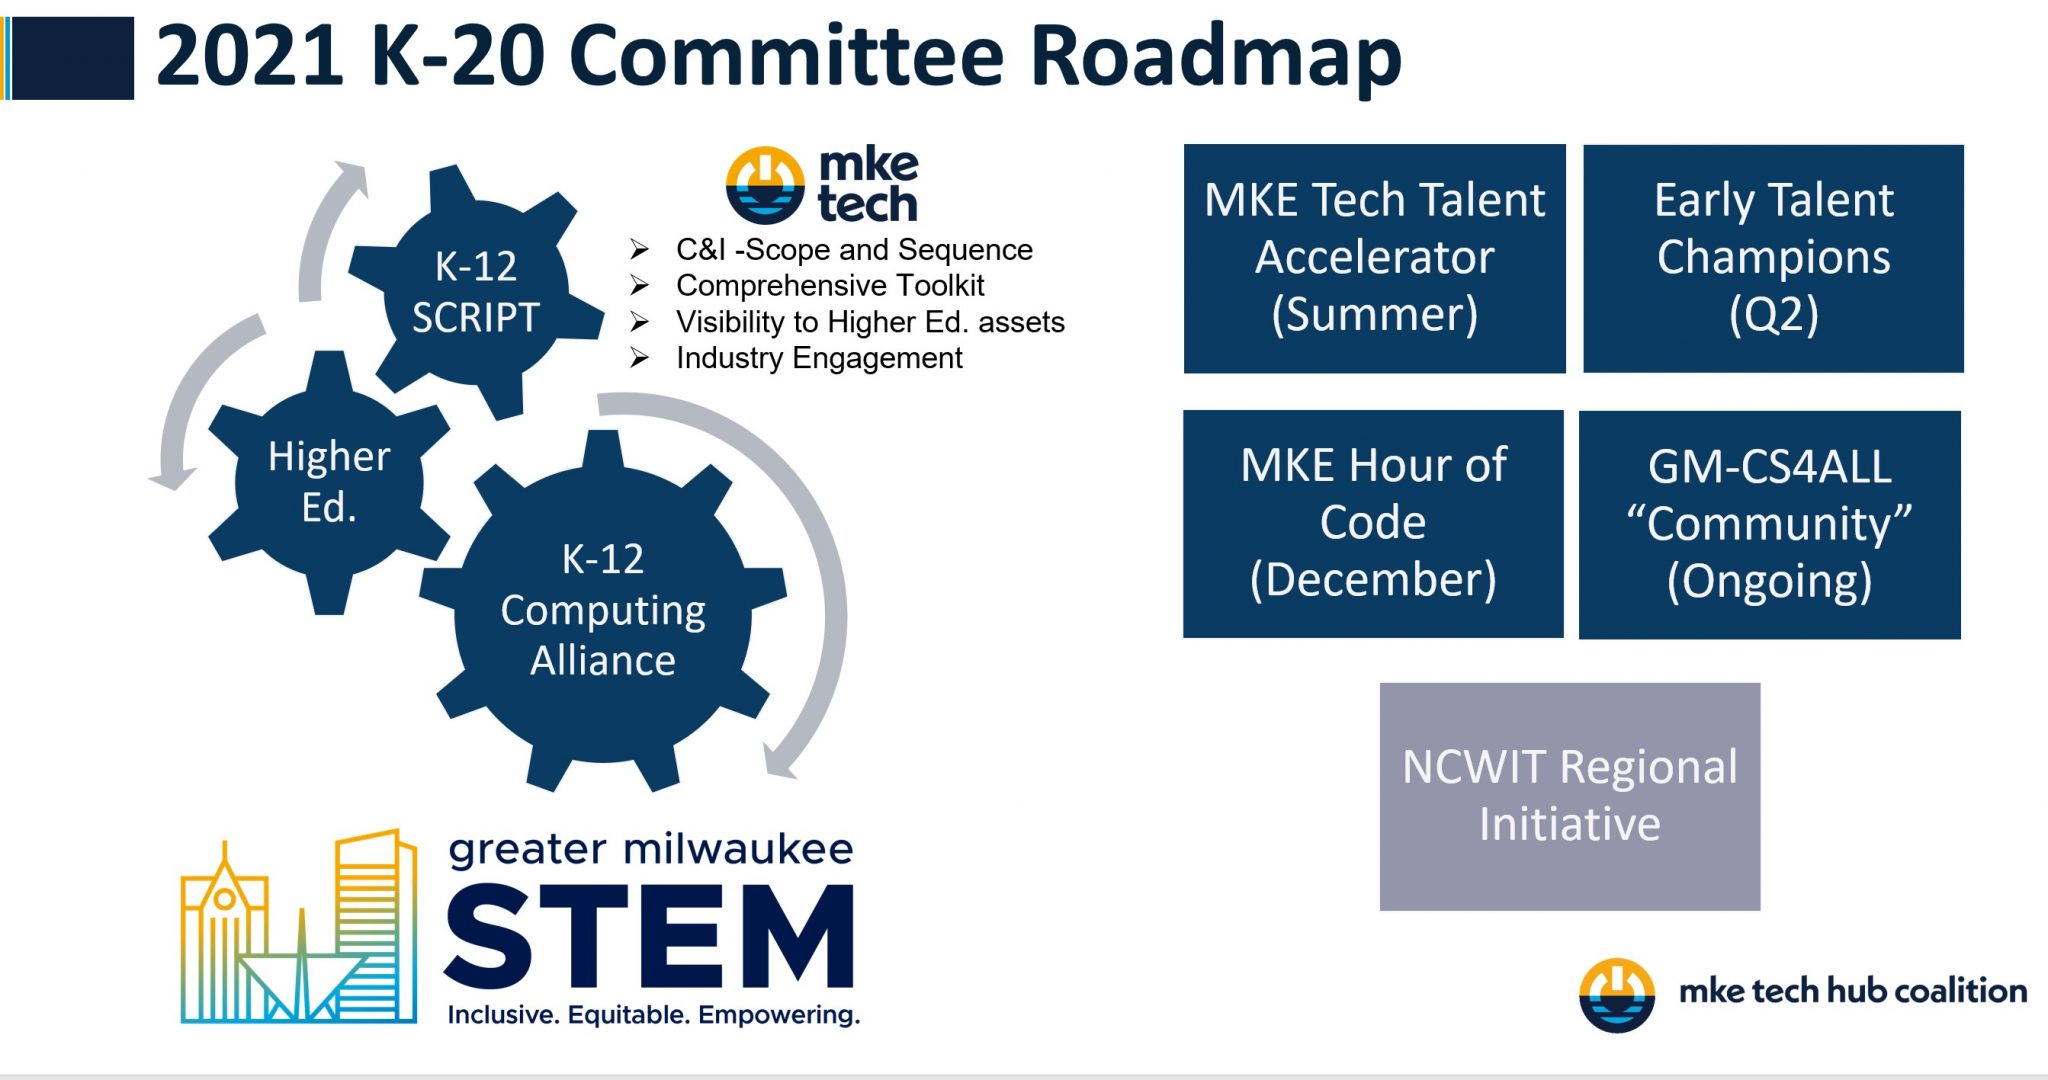 2021 K-20 Committee roadmap graphic highlighting  strategic elements of focus and programs